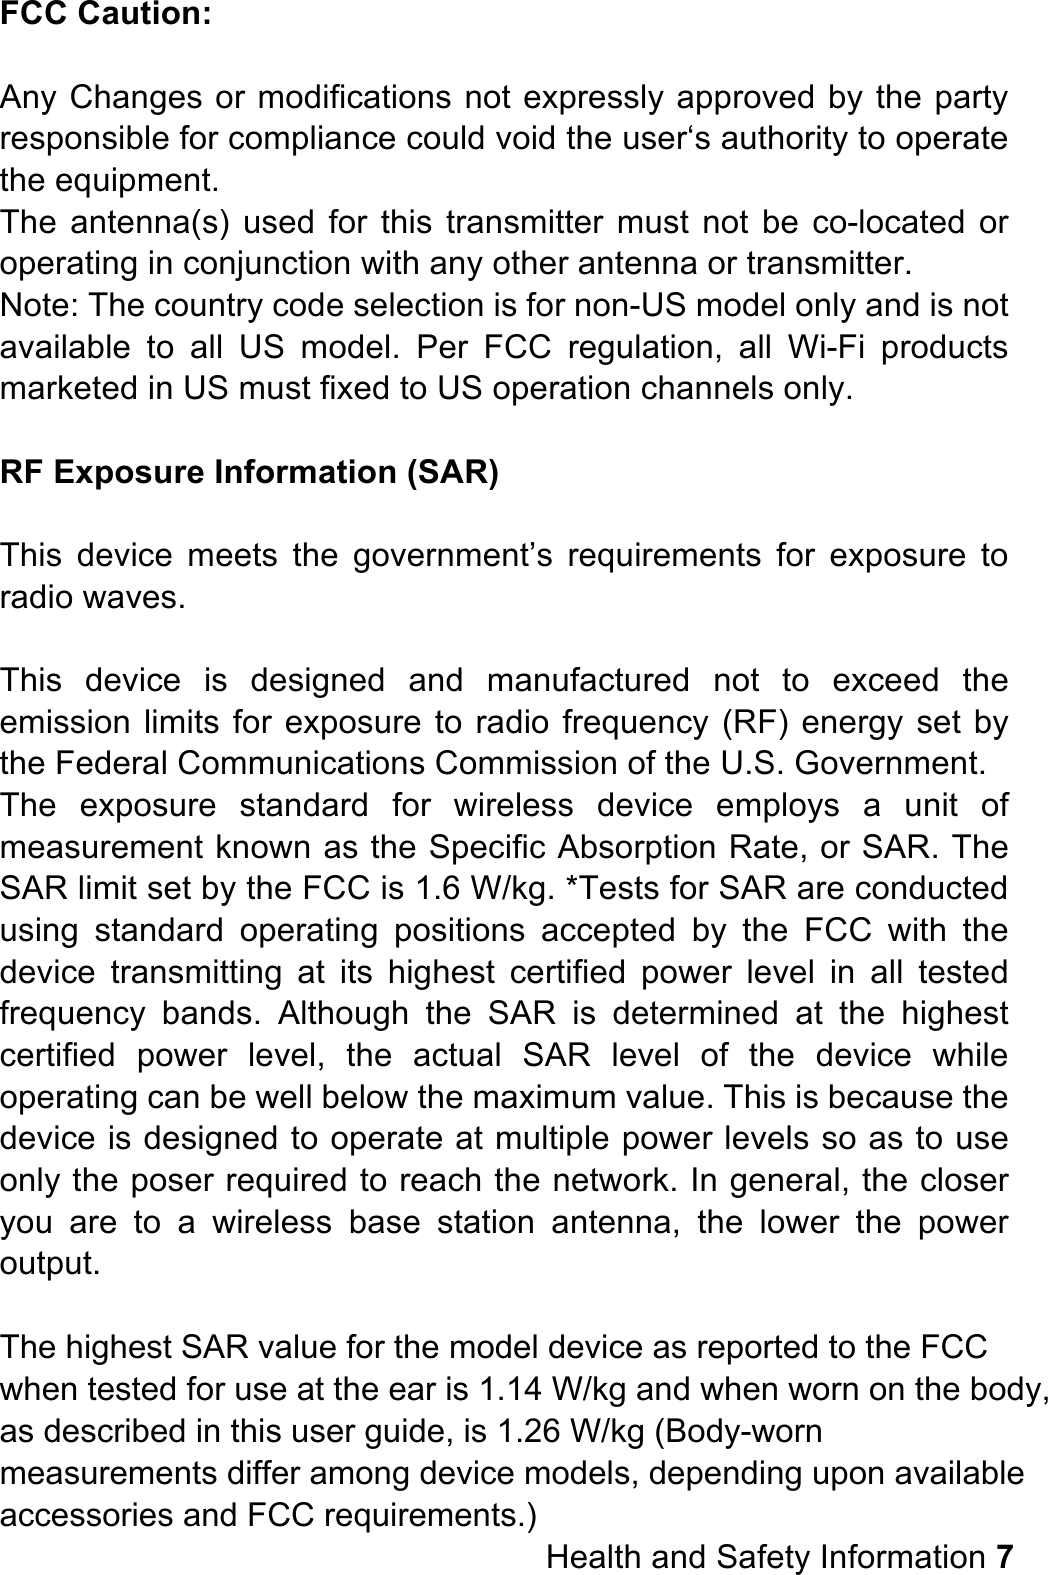 FCC Caution:  Any Changes or modifications not expressly approved by the party responsible for compliance could void the user‘s authority to operate the equipment. The  antenna(s)  used  for  this transmitter  must not  be  co-located or operating in conjunction with any other antenna or transmitter. Note: The country code selection is for non-US model only and is not available  to  all  US  model.  Per  FCC  regulation,  all  Wi-Fi  products marketed in US must fixed to US operation channels only.                RF Exposure Information (SAR)  This  device  meets  the  government’s  requirements  for  exposure  to radio waves.  This  device  is  designed  and  manufactured  not  to  exceed  the emission limits for exposure to  radio frequency (RF) energy  set by the Federal Communications Commission of the U.S. Government. The  exposure  standard  for  wireless  device  employs  a  unit  of measurement known as the Specific Absorption Rate, or SAR. The SAR limit set by the FCC is 1.6 W/kg. *Tests for SAR are conducted using  standard  operating  positions  accepted  by  the  FCC  with  the device  transmitting  at  its  highest  certified  power  level  in  all  tested frequency  bands.  Although  the  SAR  is  determined  at  the  highest certified  power level,  the  actual  SAR  level  of  the  device  while operating can be well below the maximum value. This is because the device is designed to operate at multiple power levels so as to use only the poser required to reach the network. In general, the closer you  are  to  a  wireless  base  station  antenna,  the  lower  the  power output.  The highest SAR value for the model device as reported to the FCC when tested for use at the ear is 1.14 W/kg and when worn on the body, as described in this user guide, is 1.26 W/kg (Body-worn measurements differ among device models, depending upon available accessories and FCC requirements.)                                                               Health and Safety Information 7 